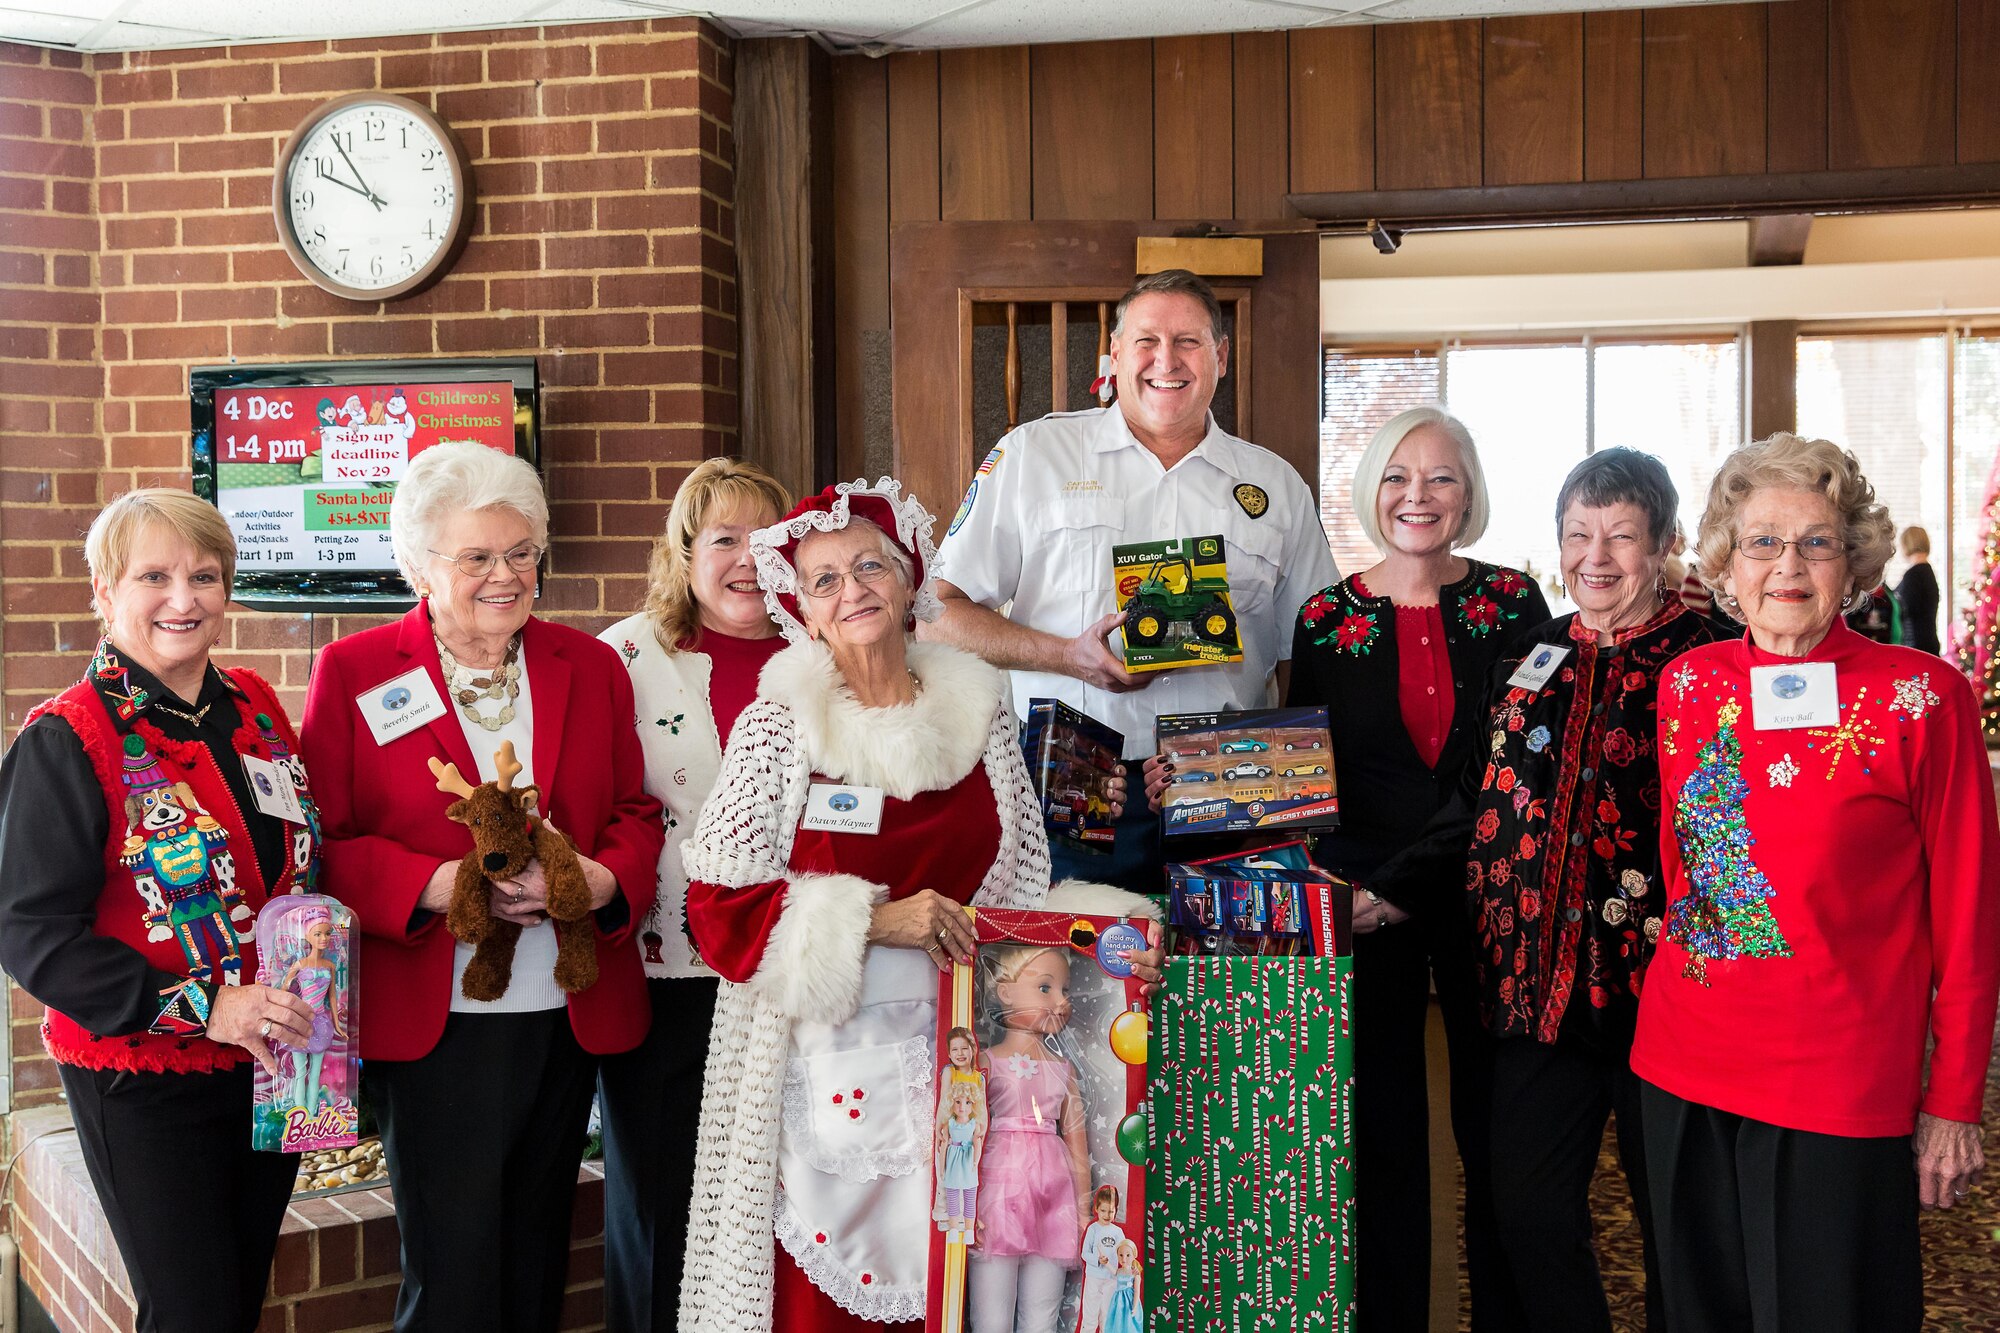 Capt. Jeff Smith (fifth from the left), with the Tullahoma Fire Department, collects gifts provided by the AEDC Woman’s Club for the Toys for Tots program. Also pictured is Anne-Marie Pender, Beverly Smith, Vicky Porter, Dawn Hayner, Suzette McCrorey, Wanda Gobbell and Kitty Ball. (Courtesy photo)